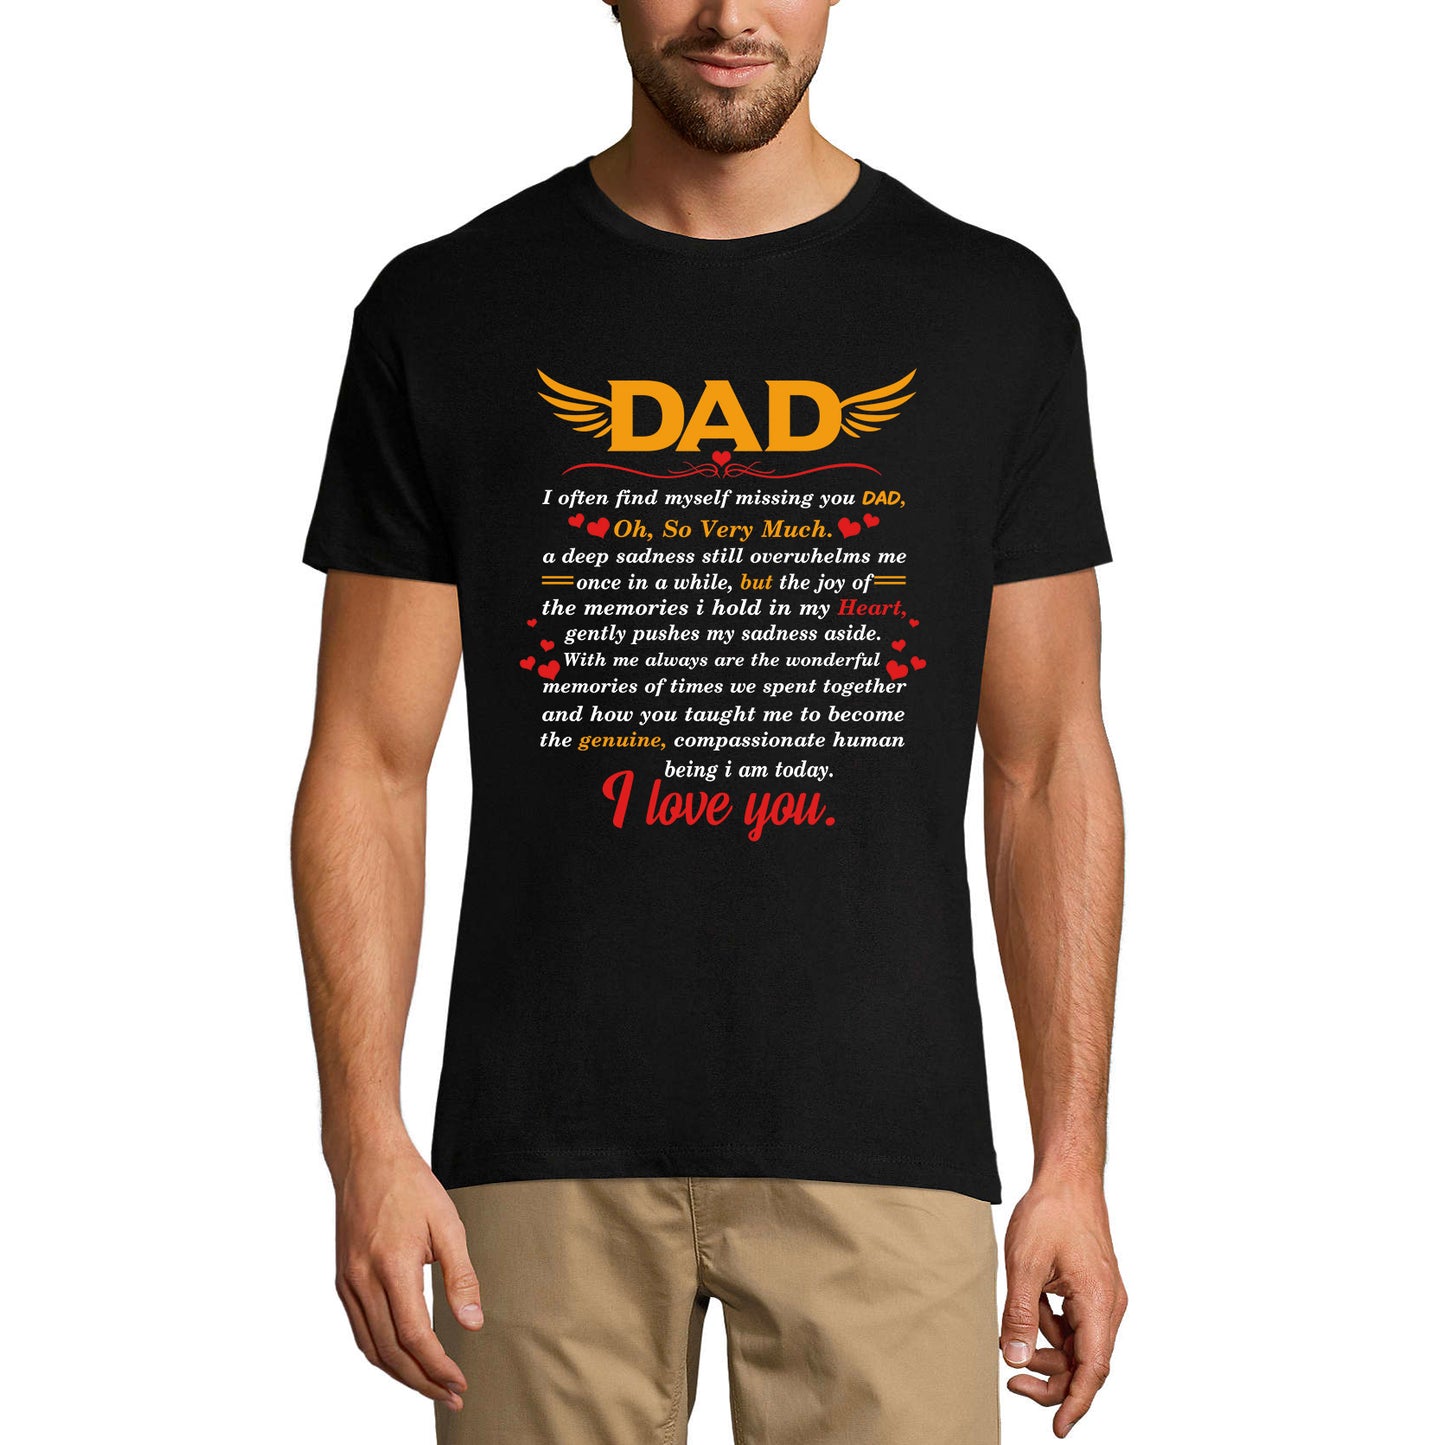 ULTRABASIC Men's T-Shirt Dad I Love You - Emotional Quote - Graphic Apparel